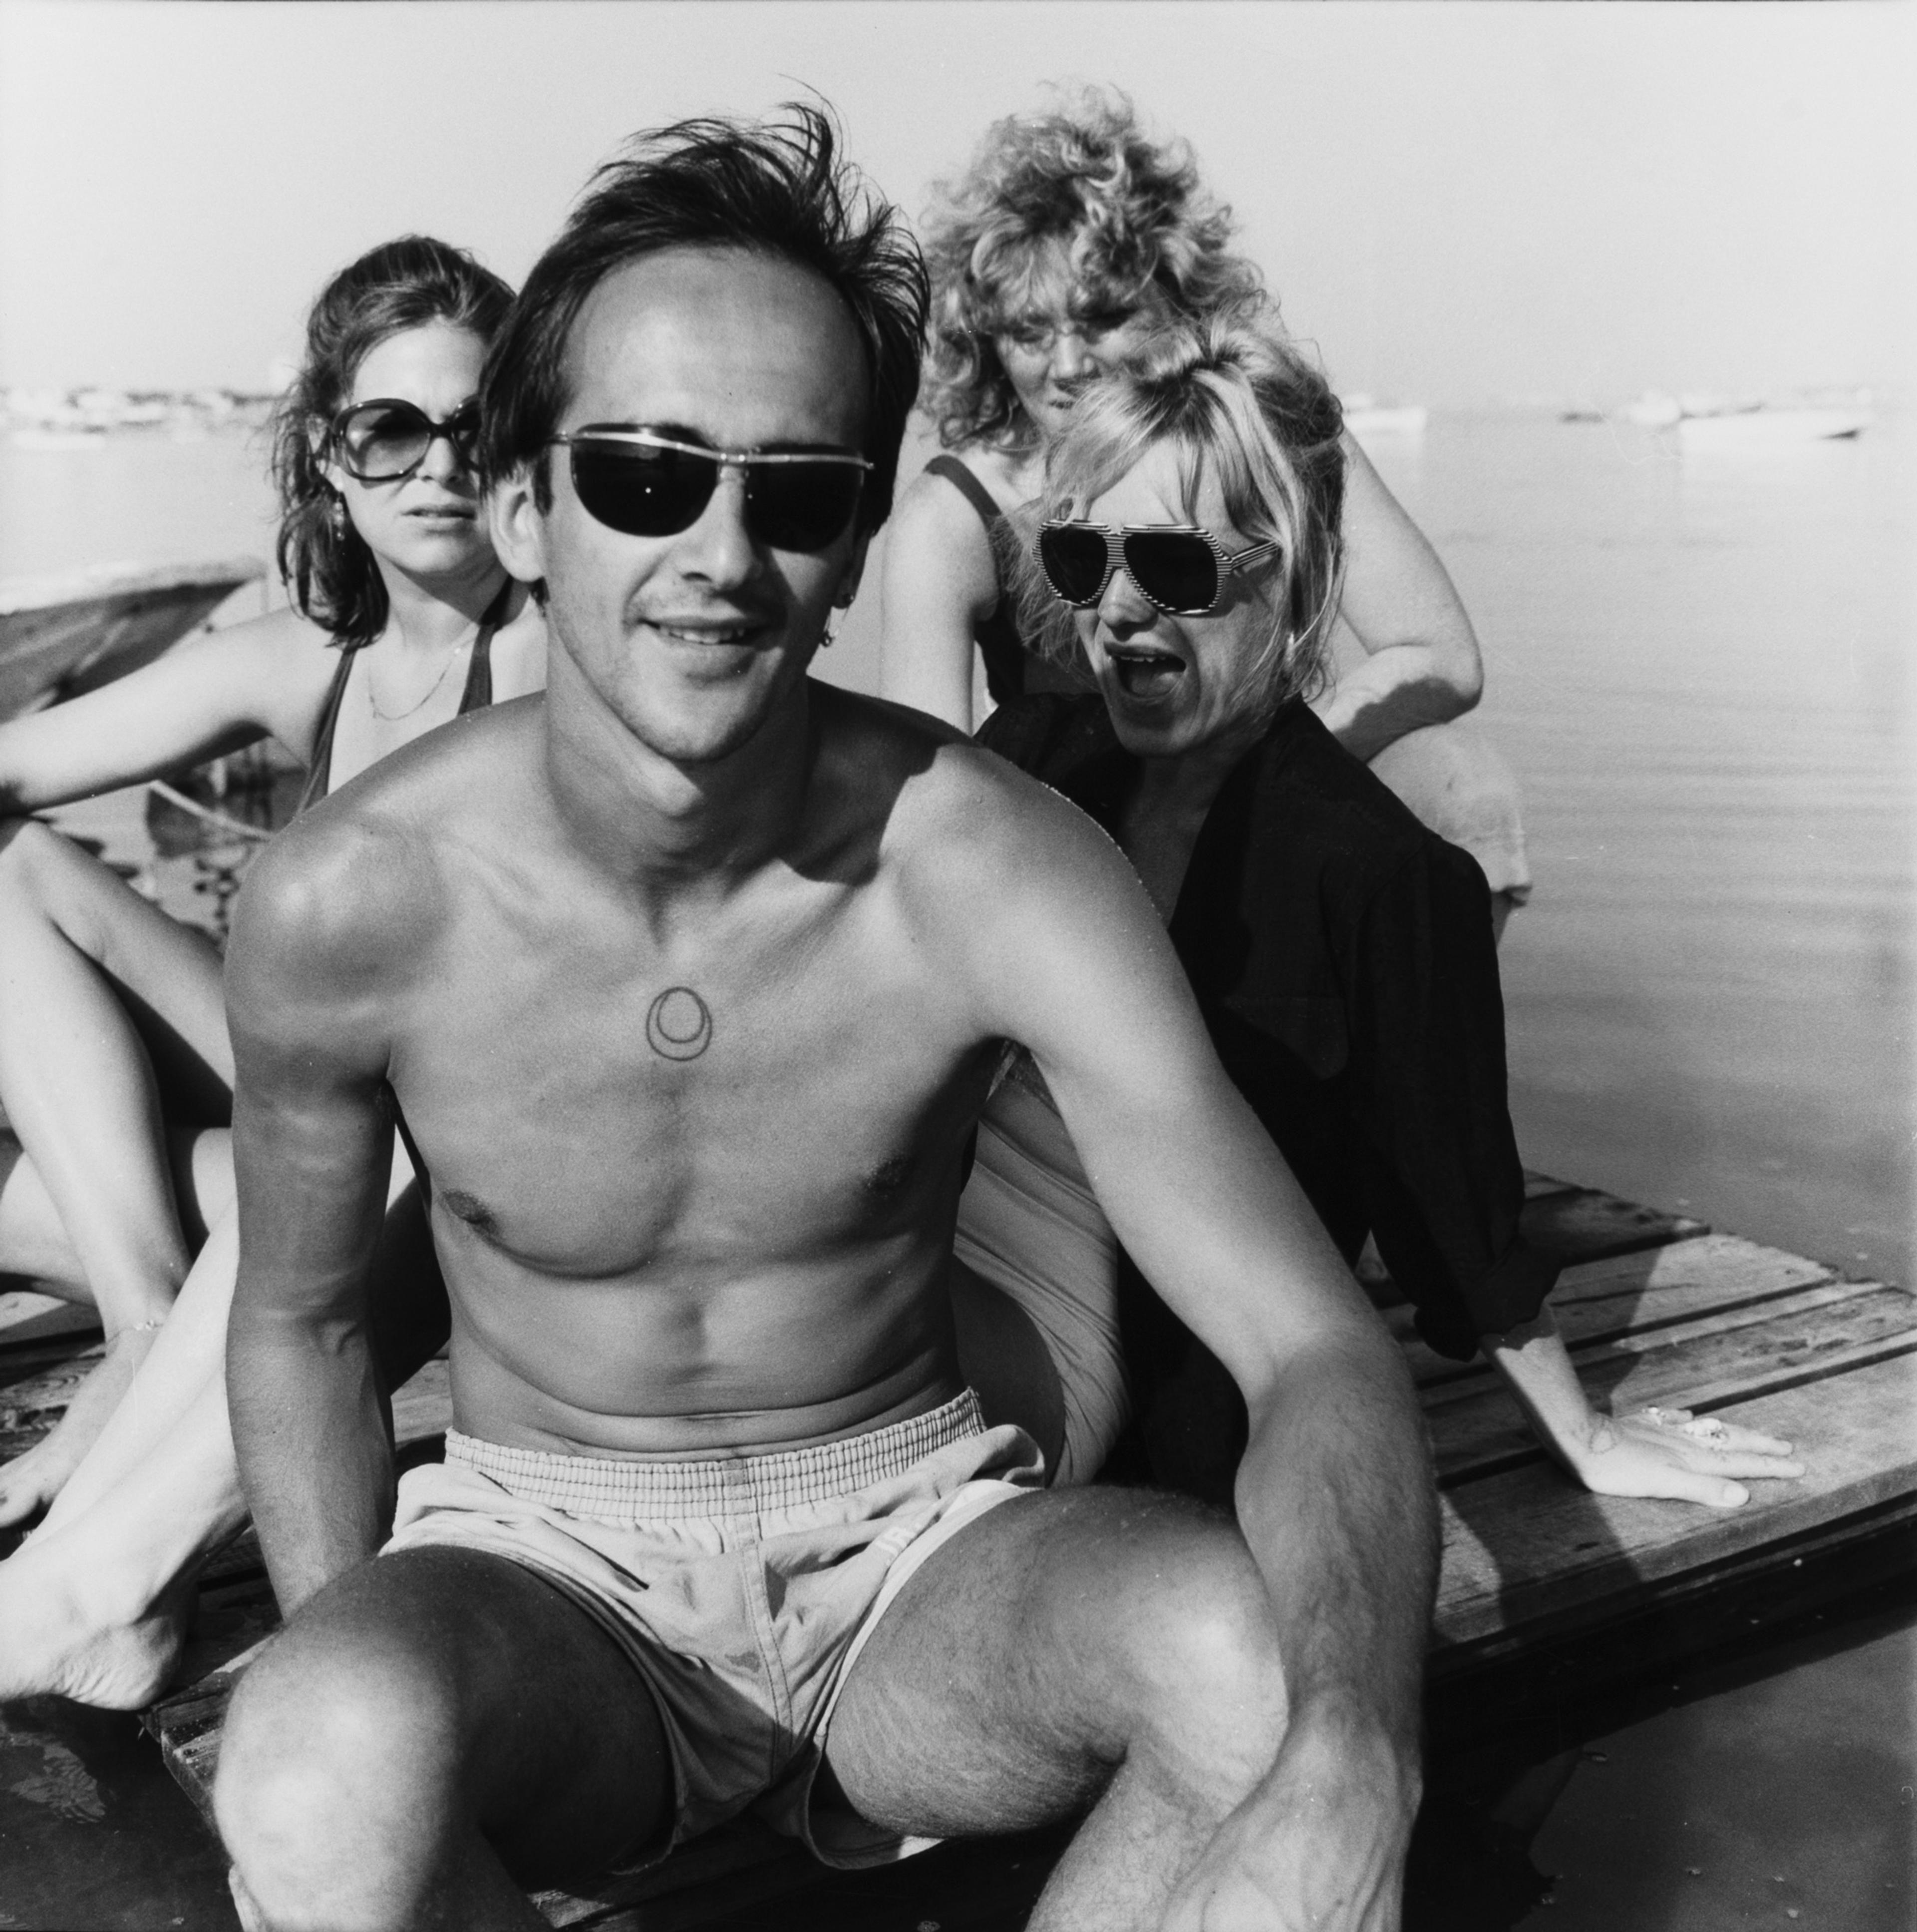 David Armstrong, Bruce, Cookie, Sharon, and Linda at Herring Cove, Provincetown, 1975